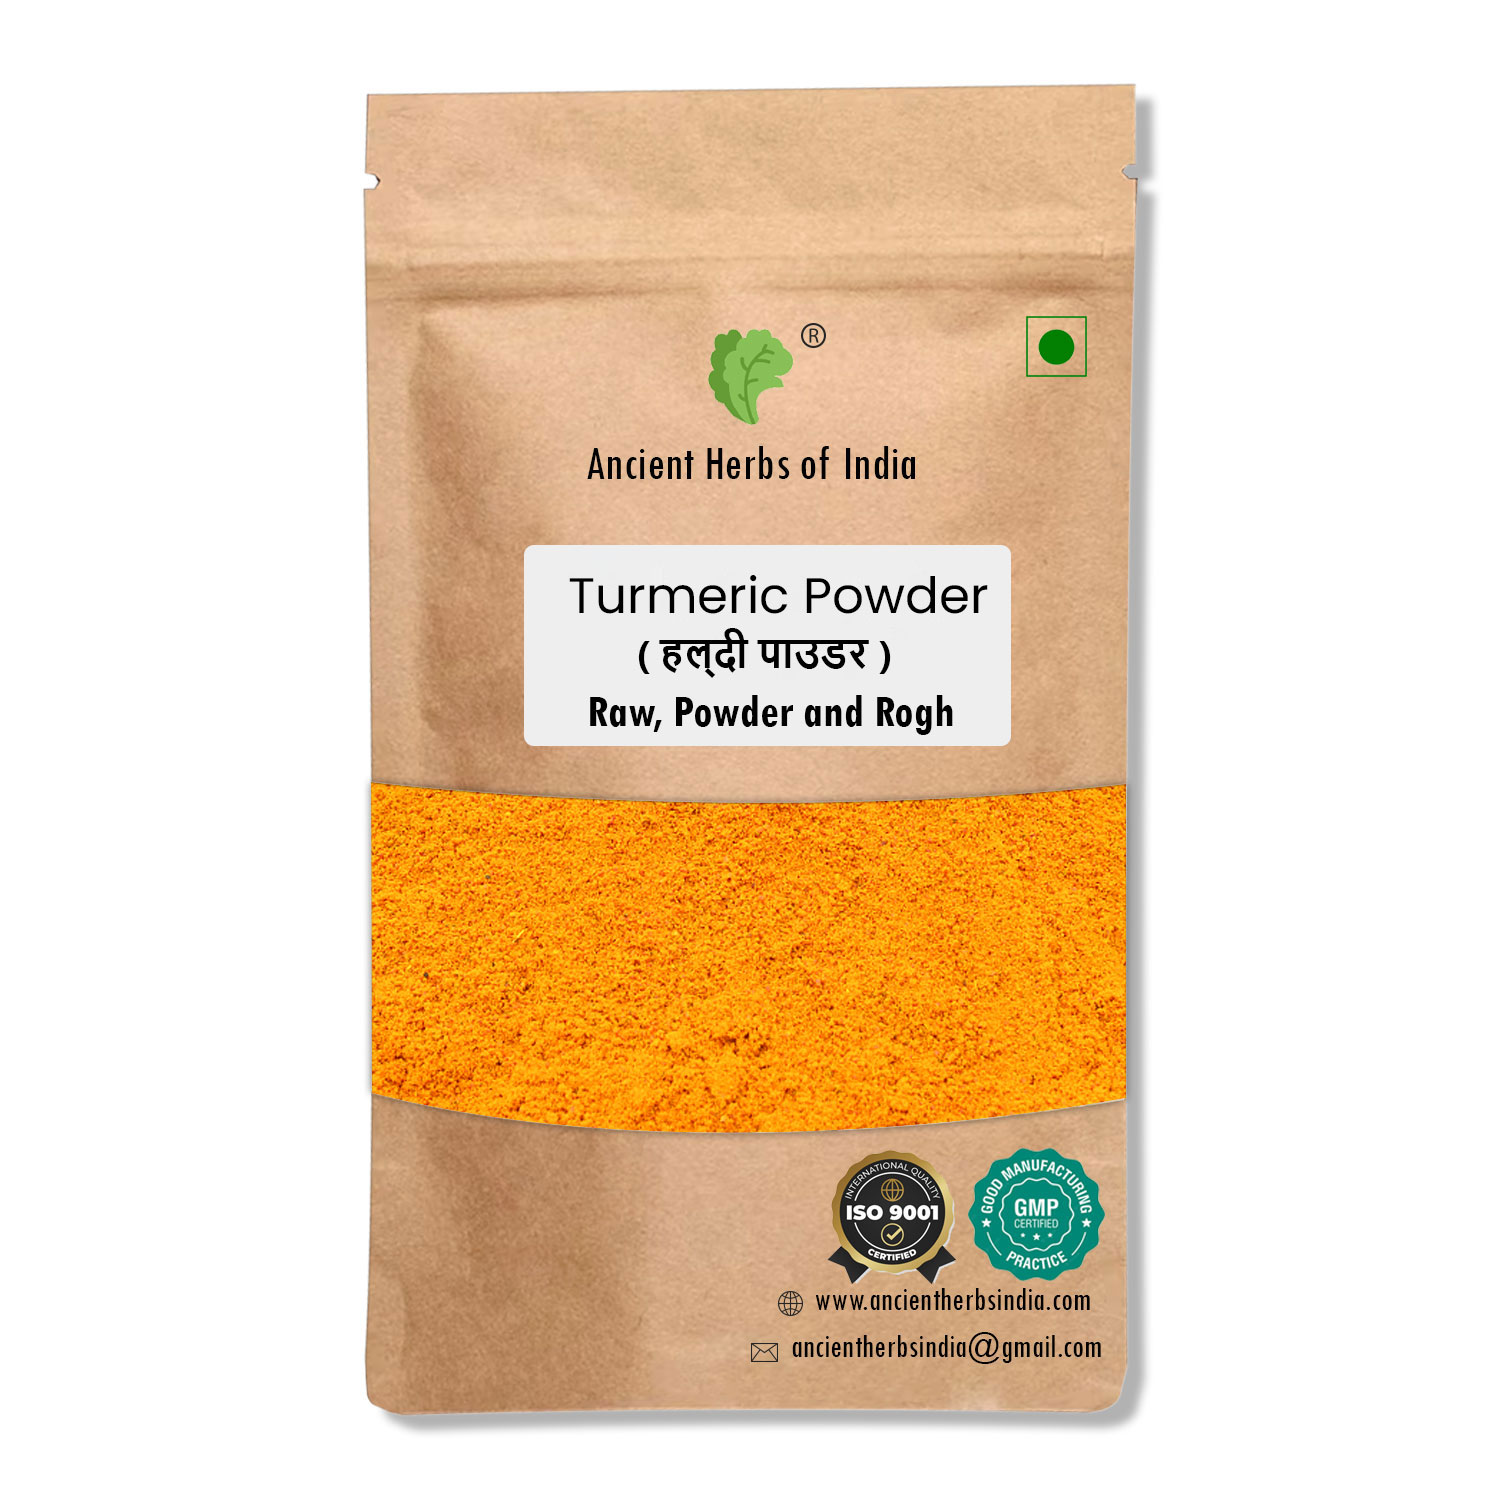 The Golden Spice: Exploring the Health Benefits of Turmeric Powder